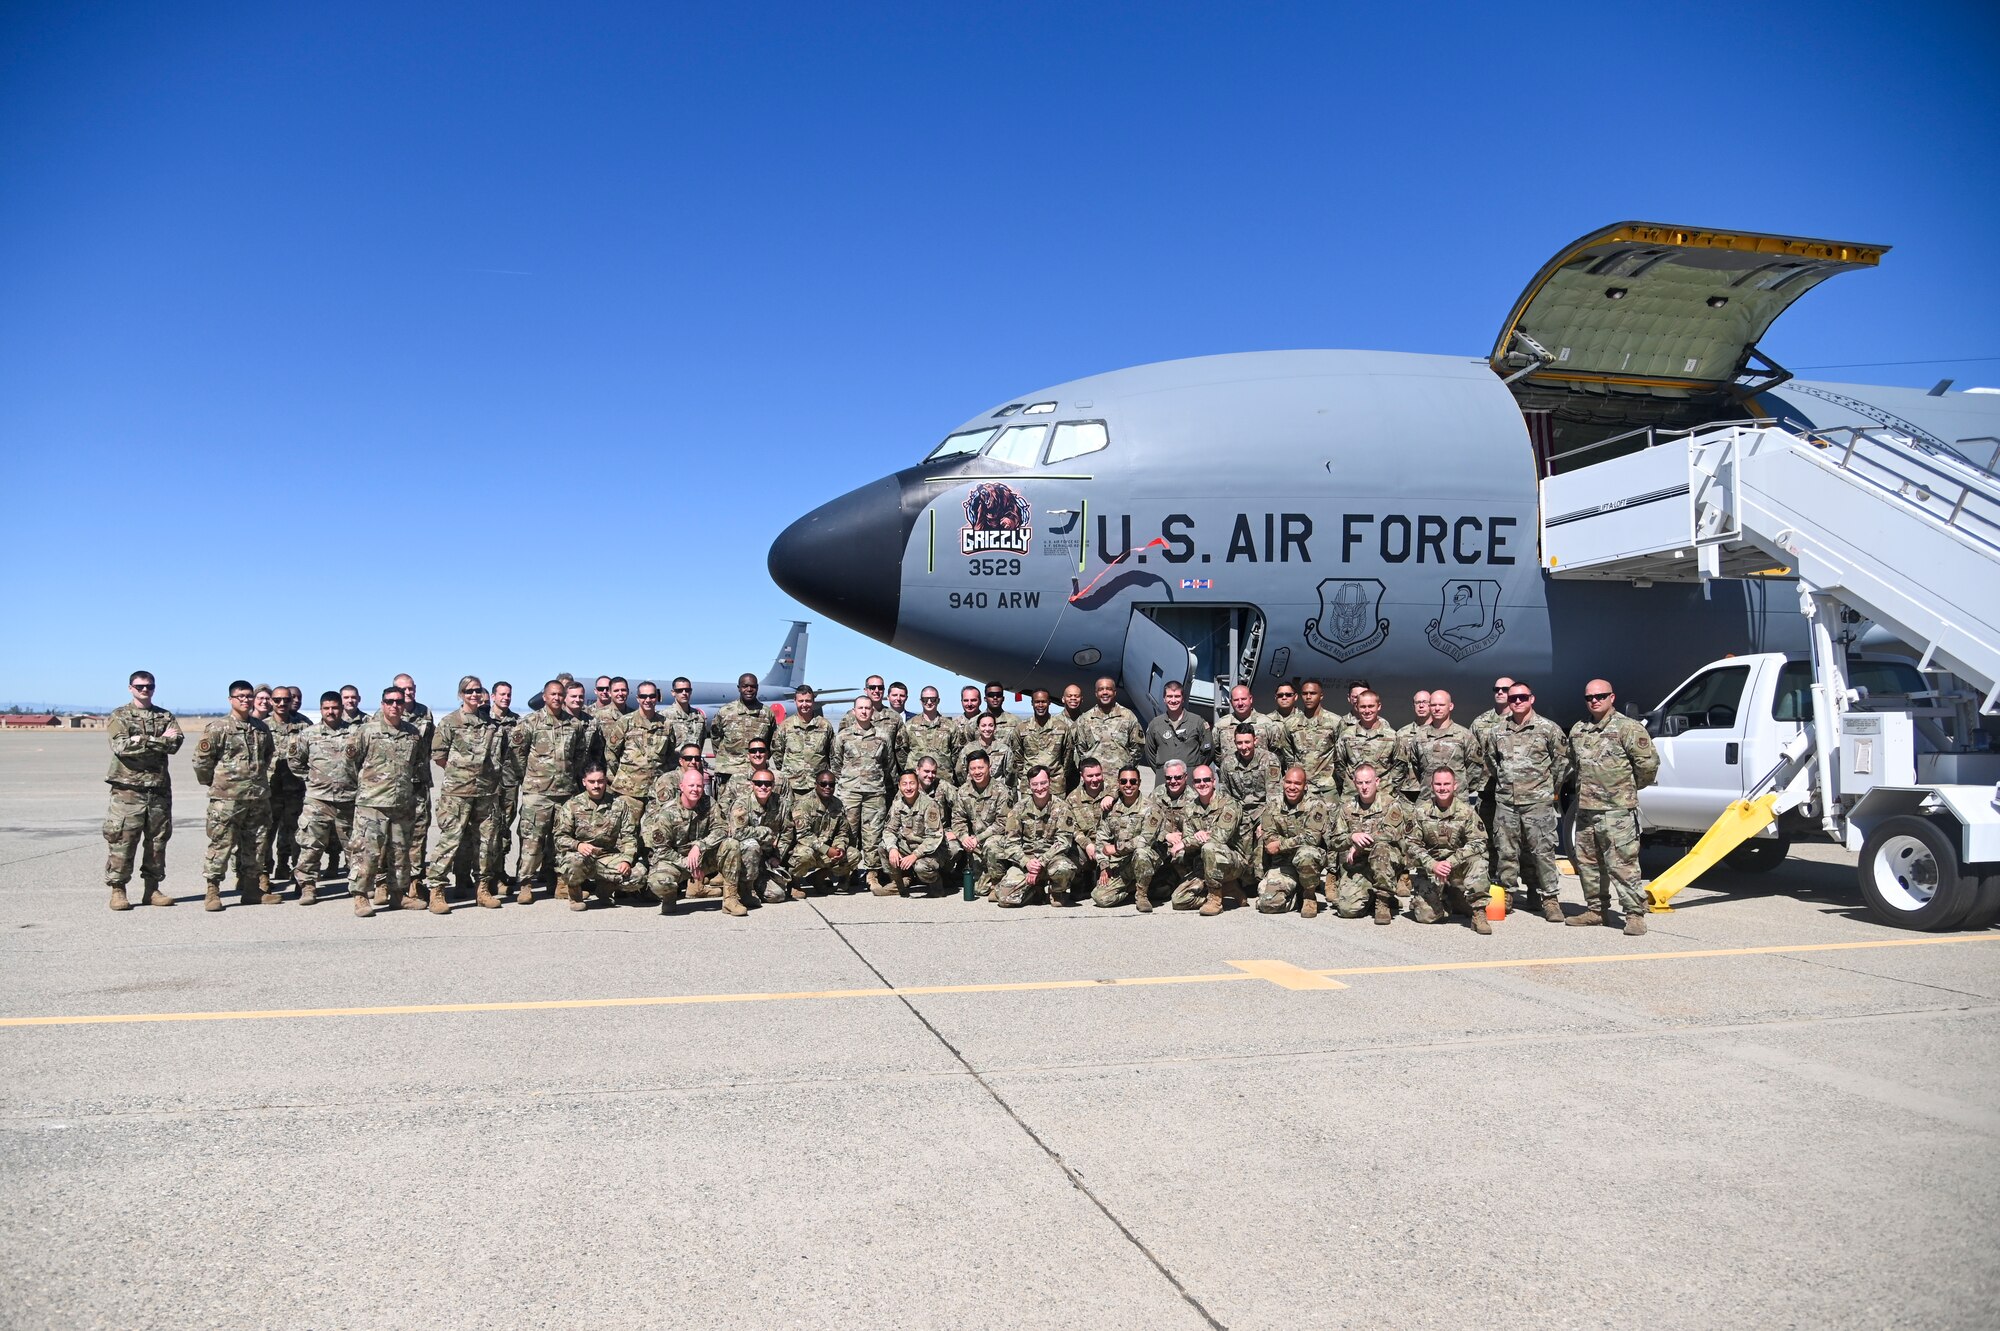 Airmen from the 940th Air Refueling Wing, Fourth Air Force and Air Force Reserve Command pose with the unit’s newest KC-135 Stratotanker nose art, "Grizzly," June 13, 2021, at Beale Air Force Base, California.